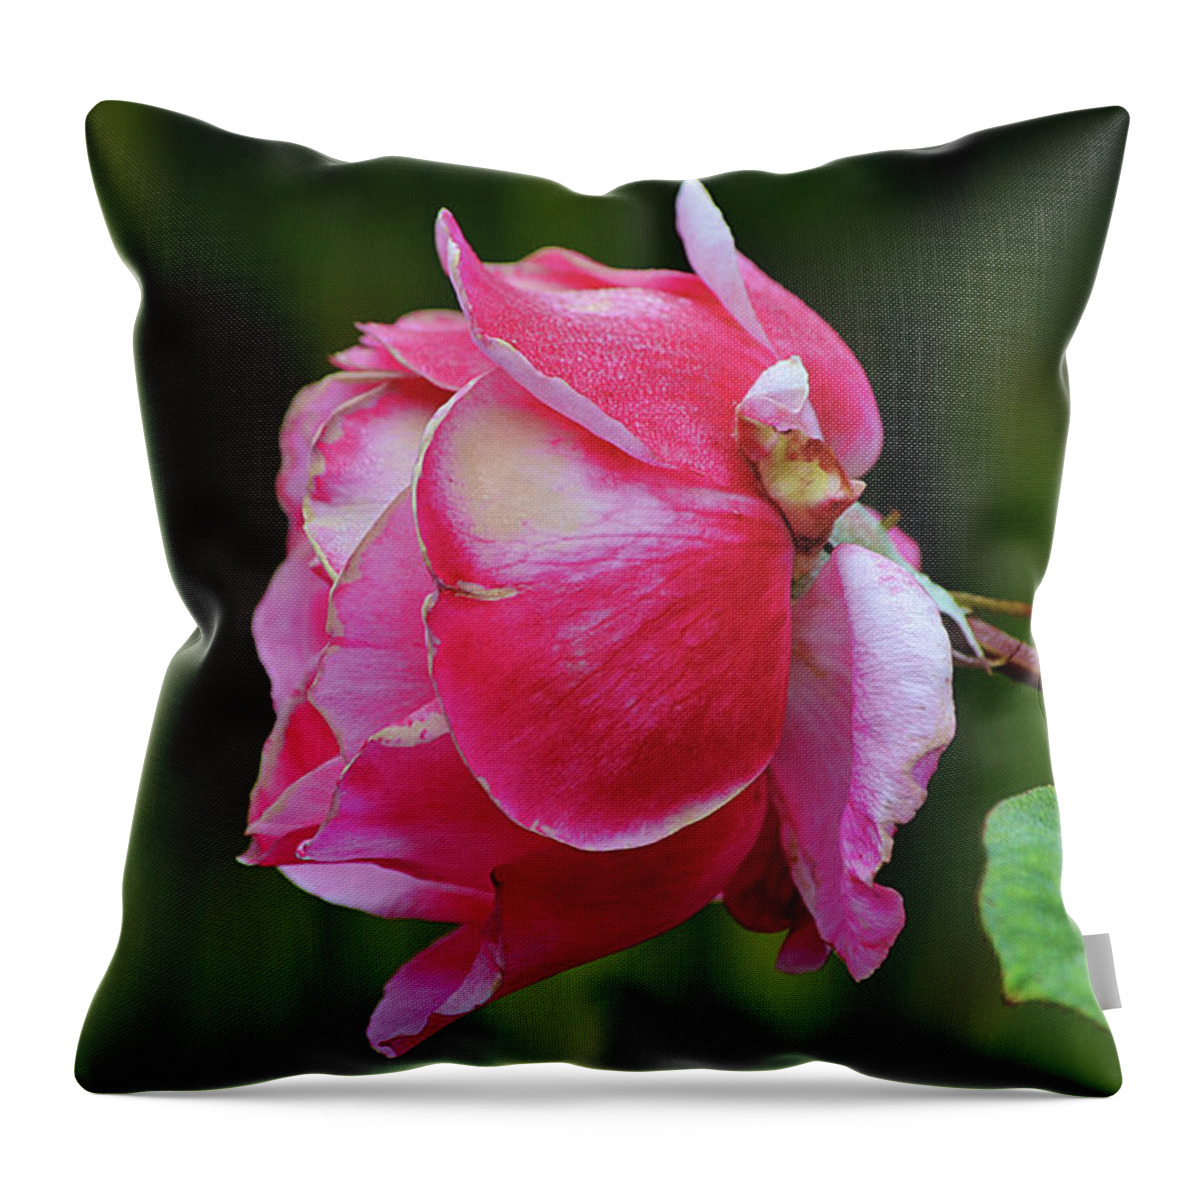 Rose Throw Pillow featuring the photograph Perfect Not Perfect Pink Rose by Gaby Ethington